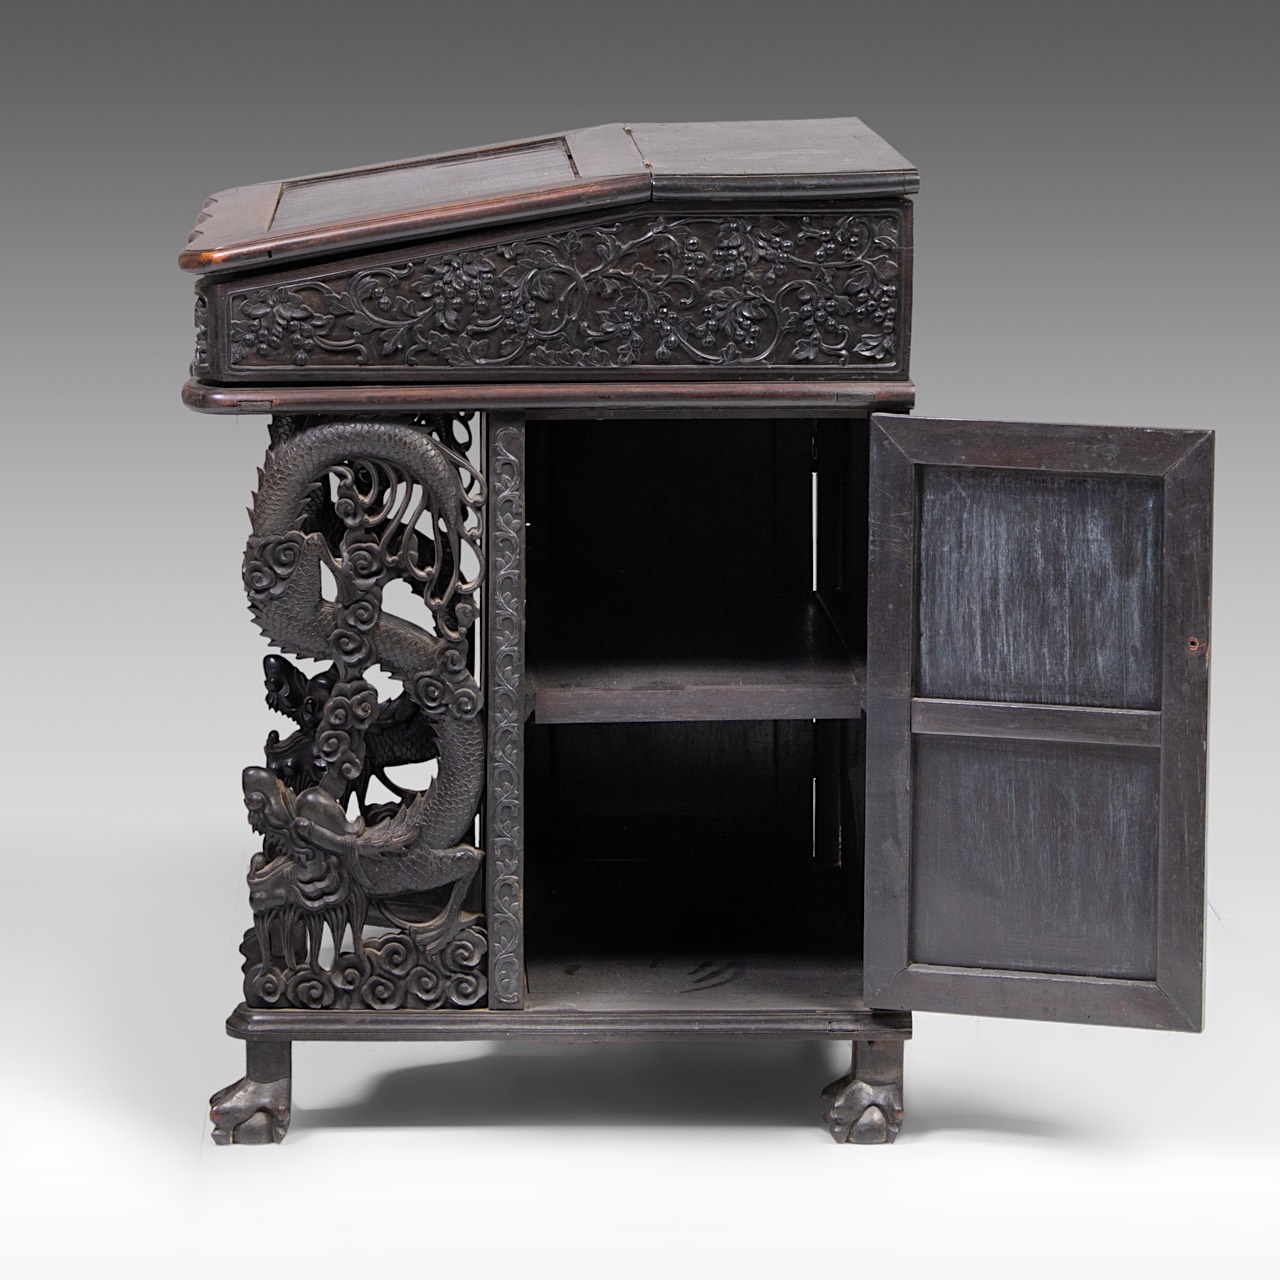 A compact South Chinese carved hardwood writing desk, 19thC, H 83 - W 66 - D 62 cm - Image 3 of 10